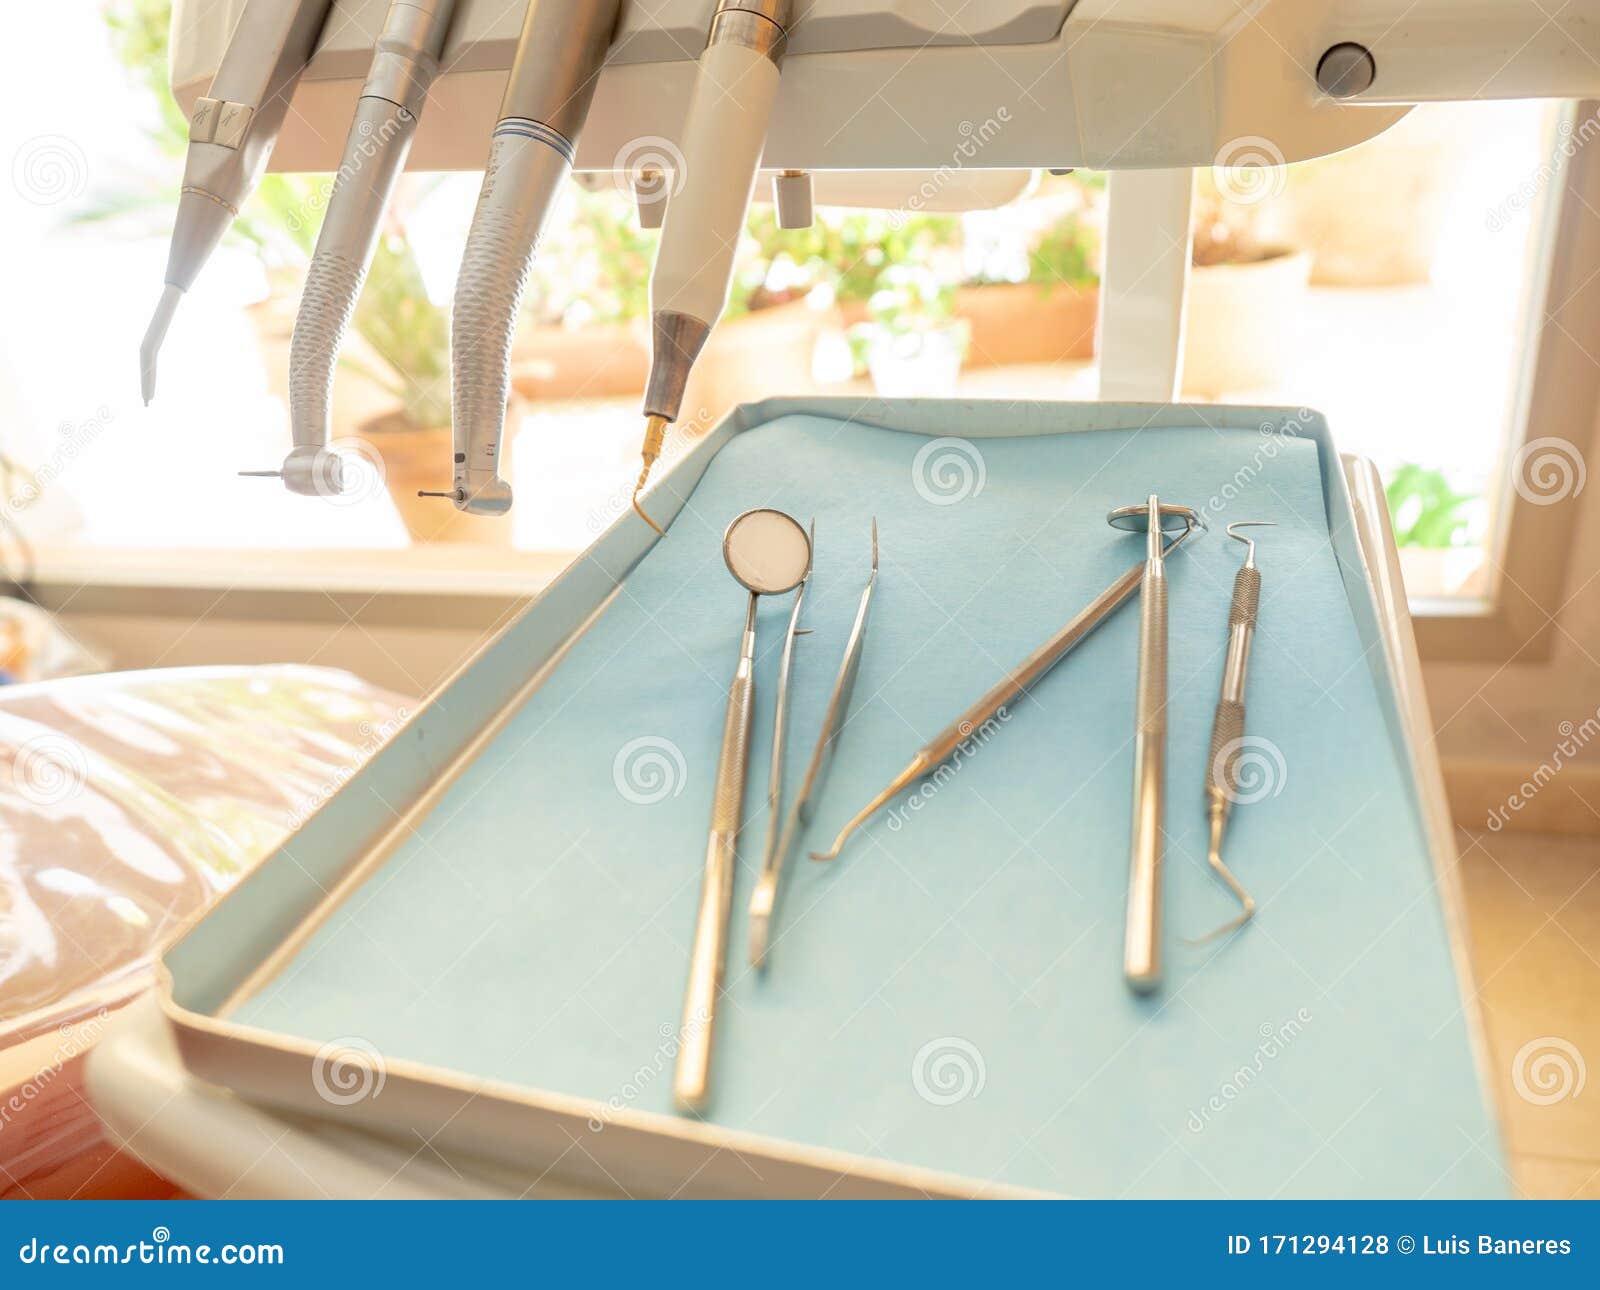 close-up of a dentist`s instrument in the clinic where he attends patients